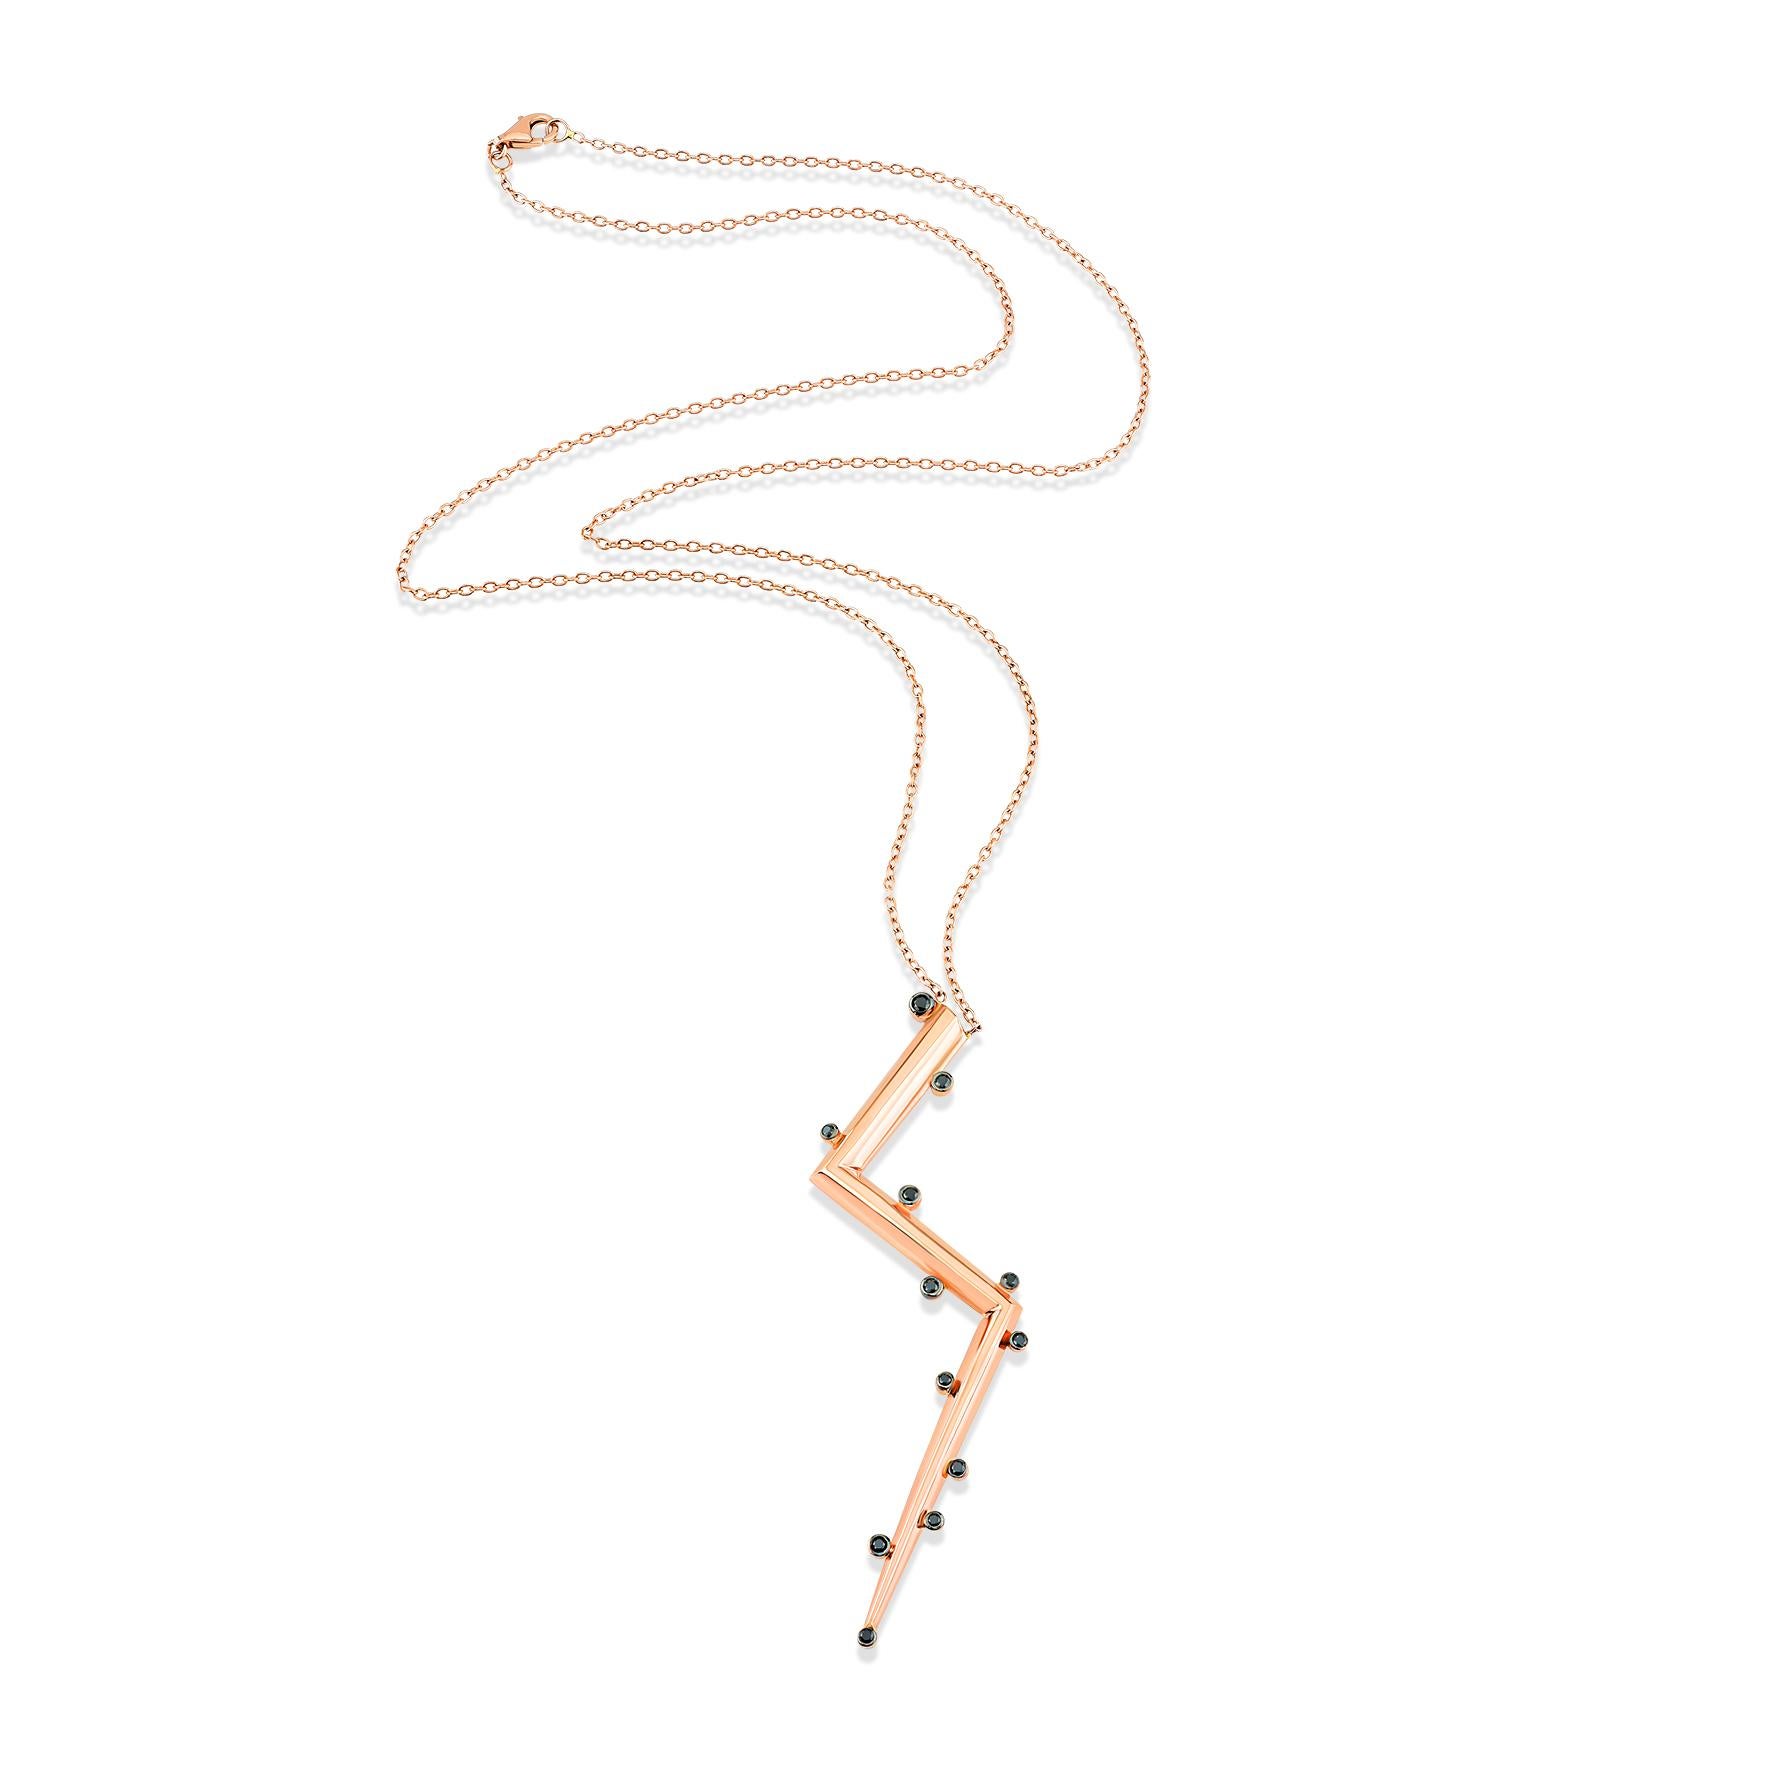 Long ightning Necklace With Black Diamond İn 14K Rose Gold By Selda Jewellery

Additional Information:
Collection: Thunder Collection
14k Rose Gold
0.22ct Black Diamond
Pendant Height 8cm
Chain Length 60cm